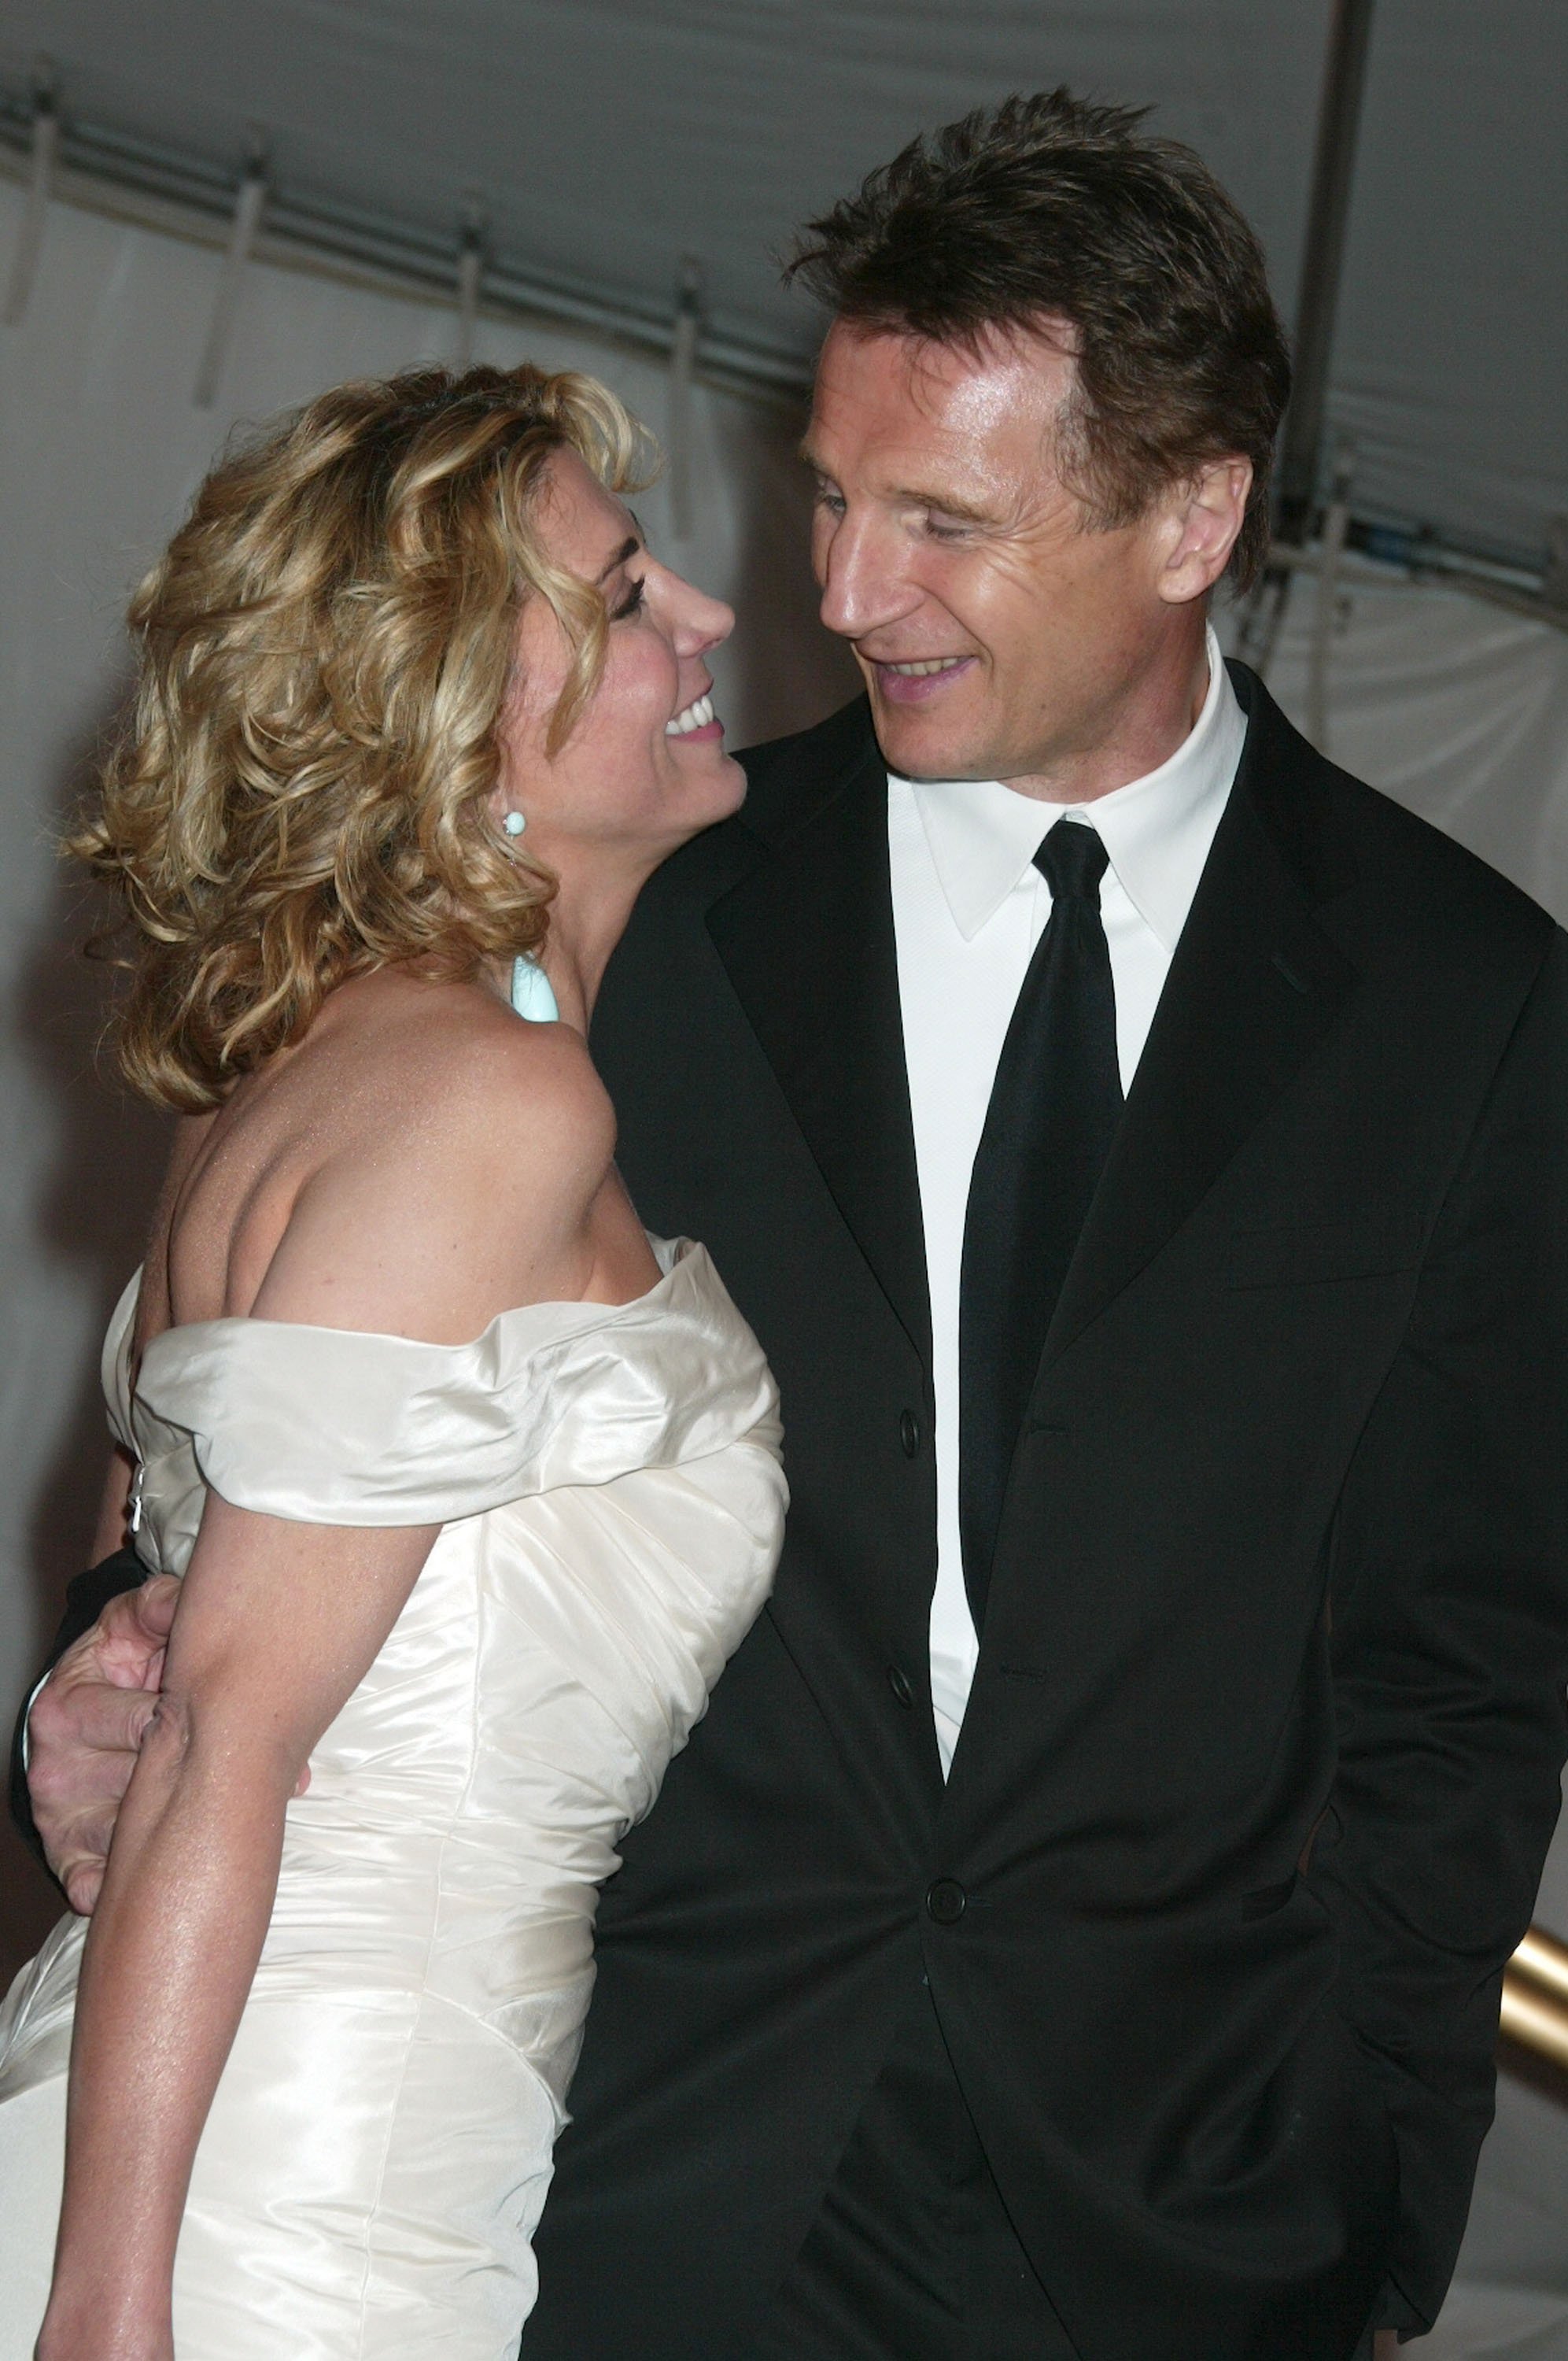 Natasha Richardson and Liam Neeson during The Costume Institute's Gala Celebrating "Chanel" at The Metropolitan Museum of Art in New York City, New York. | Source: Getty Images